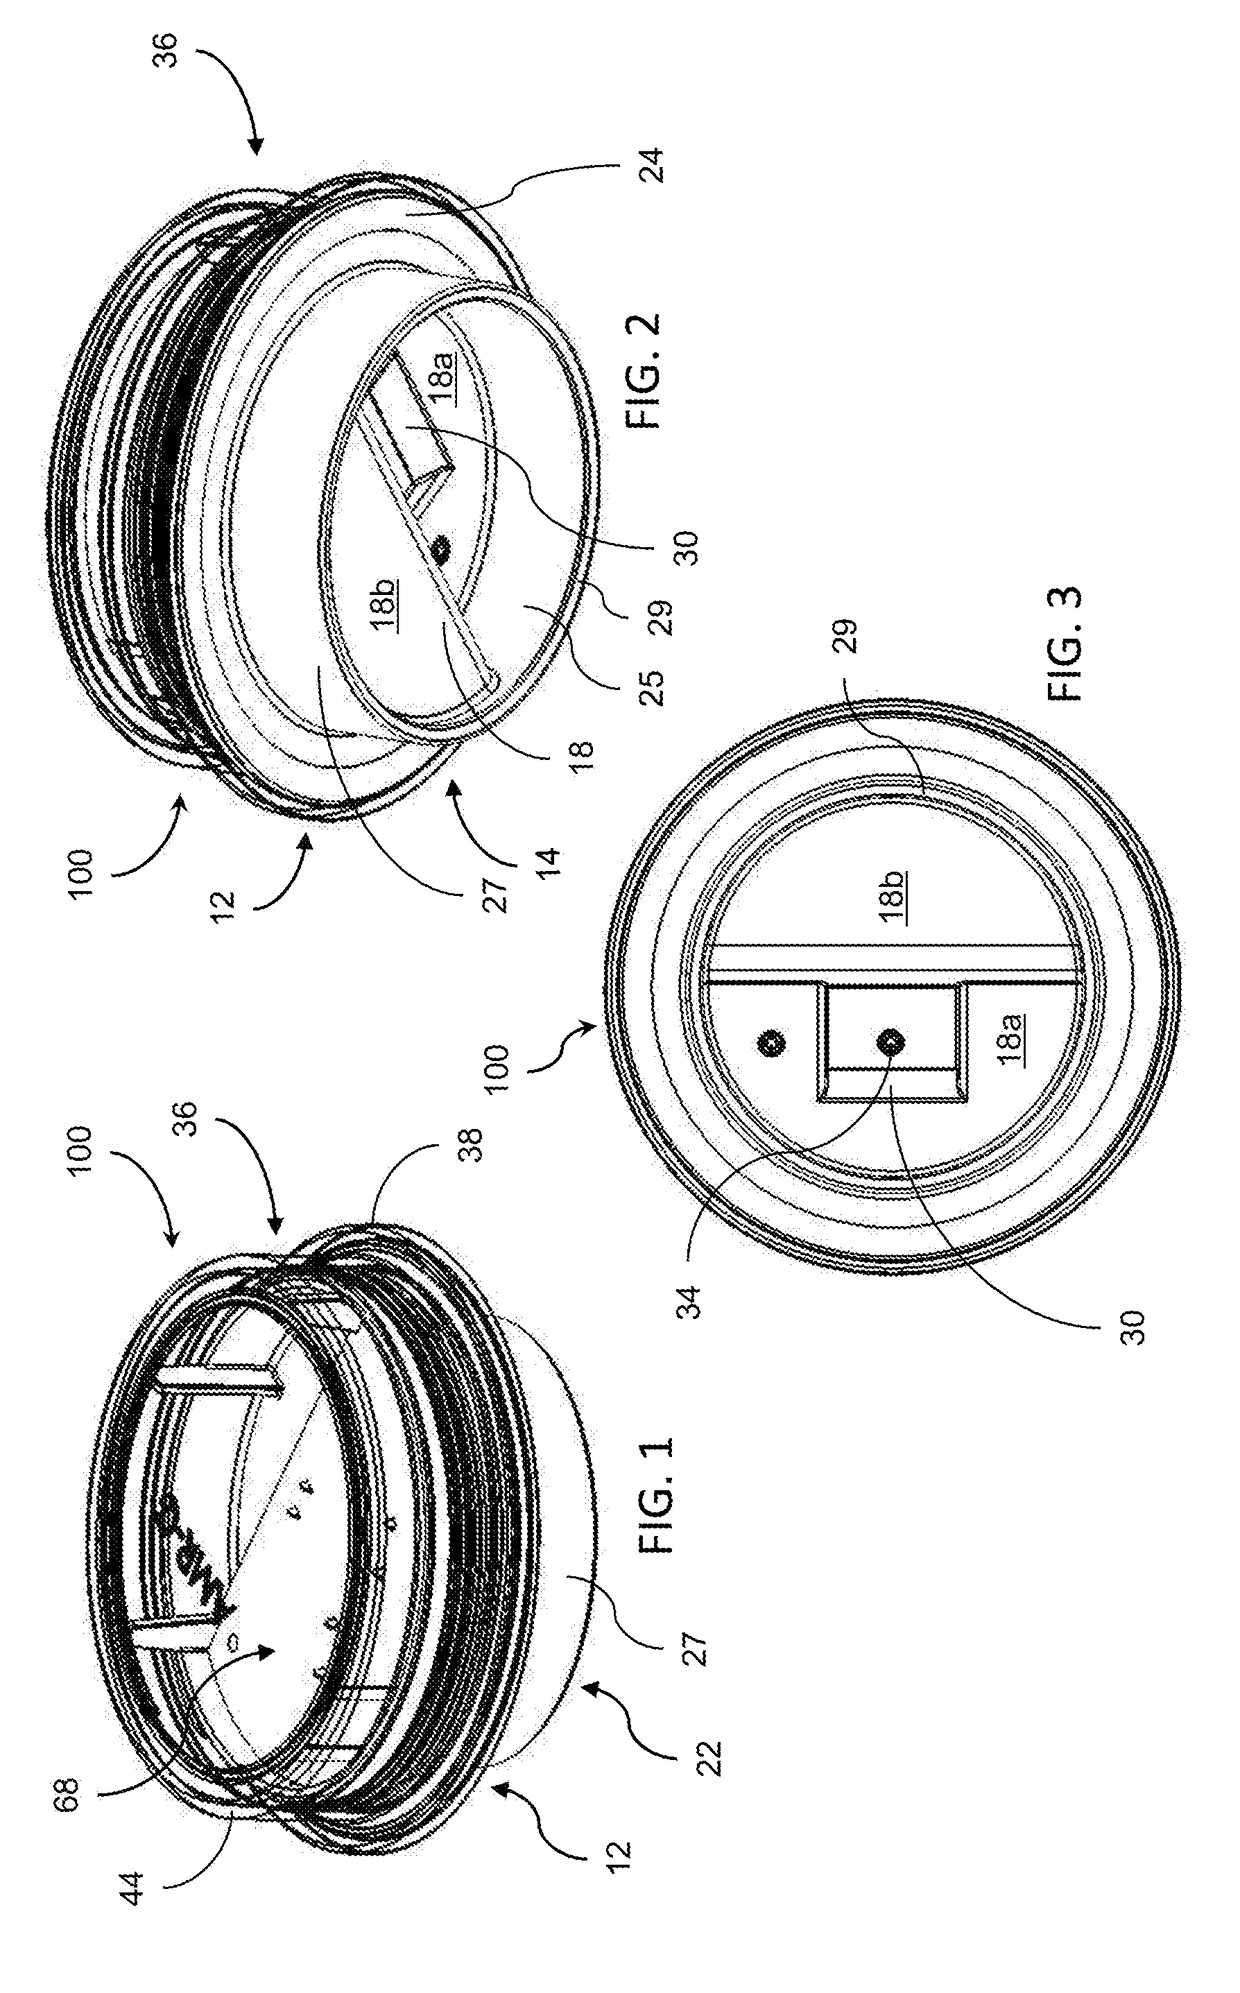 Meter reading device and system